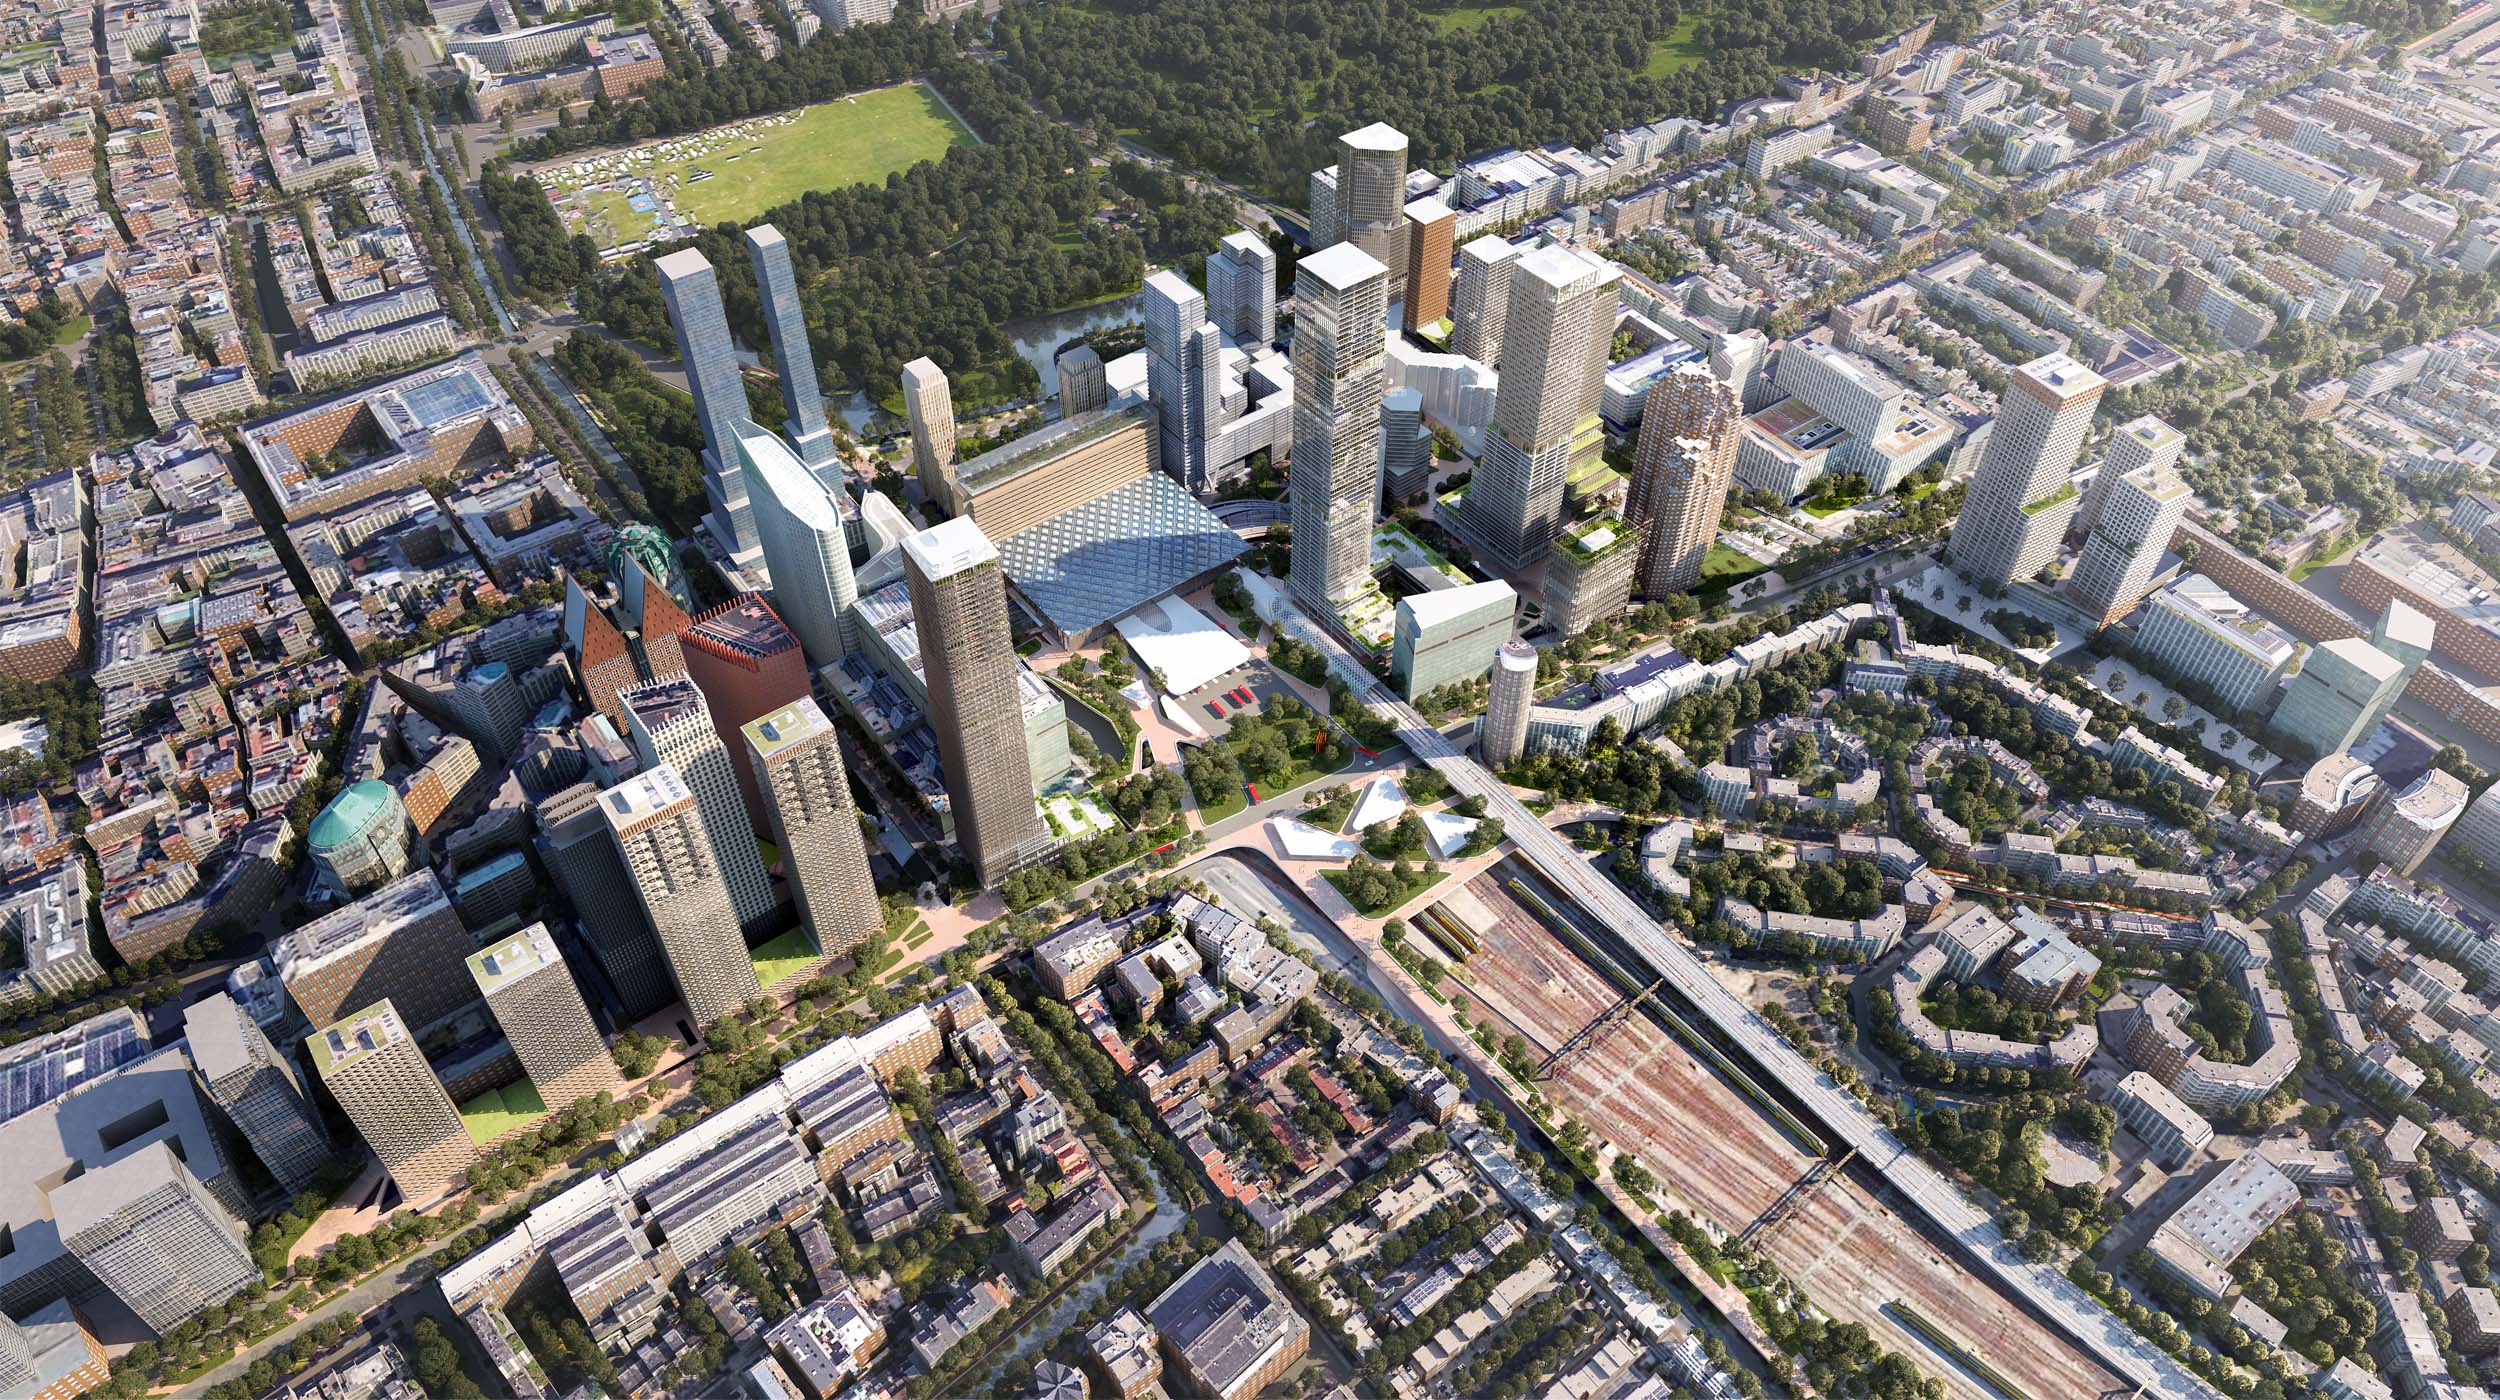 The Hague Central Station Urban Plan Vision